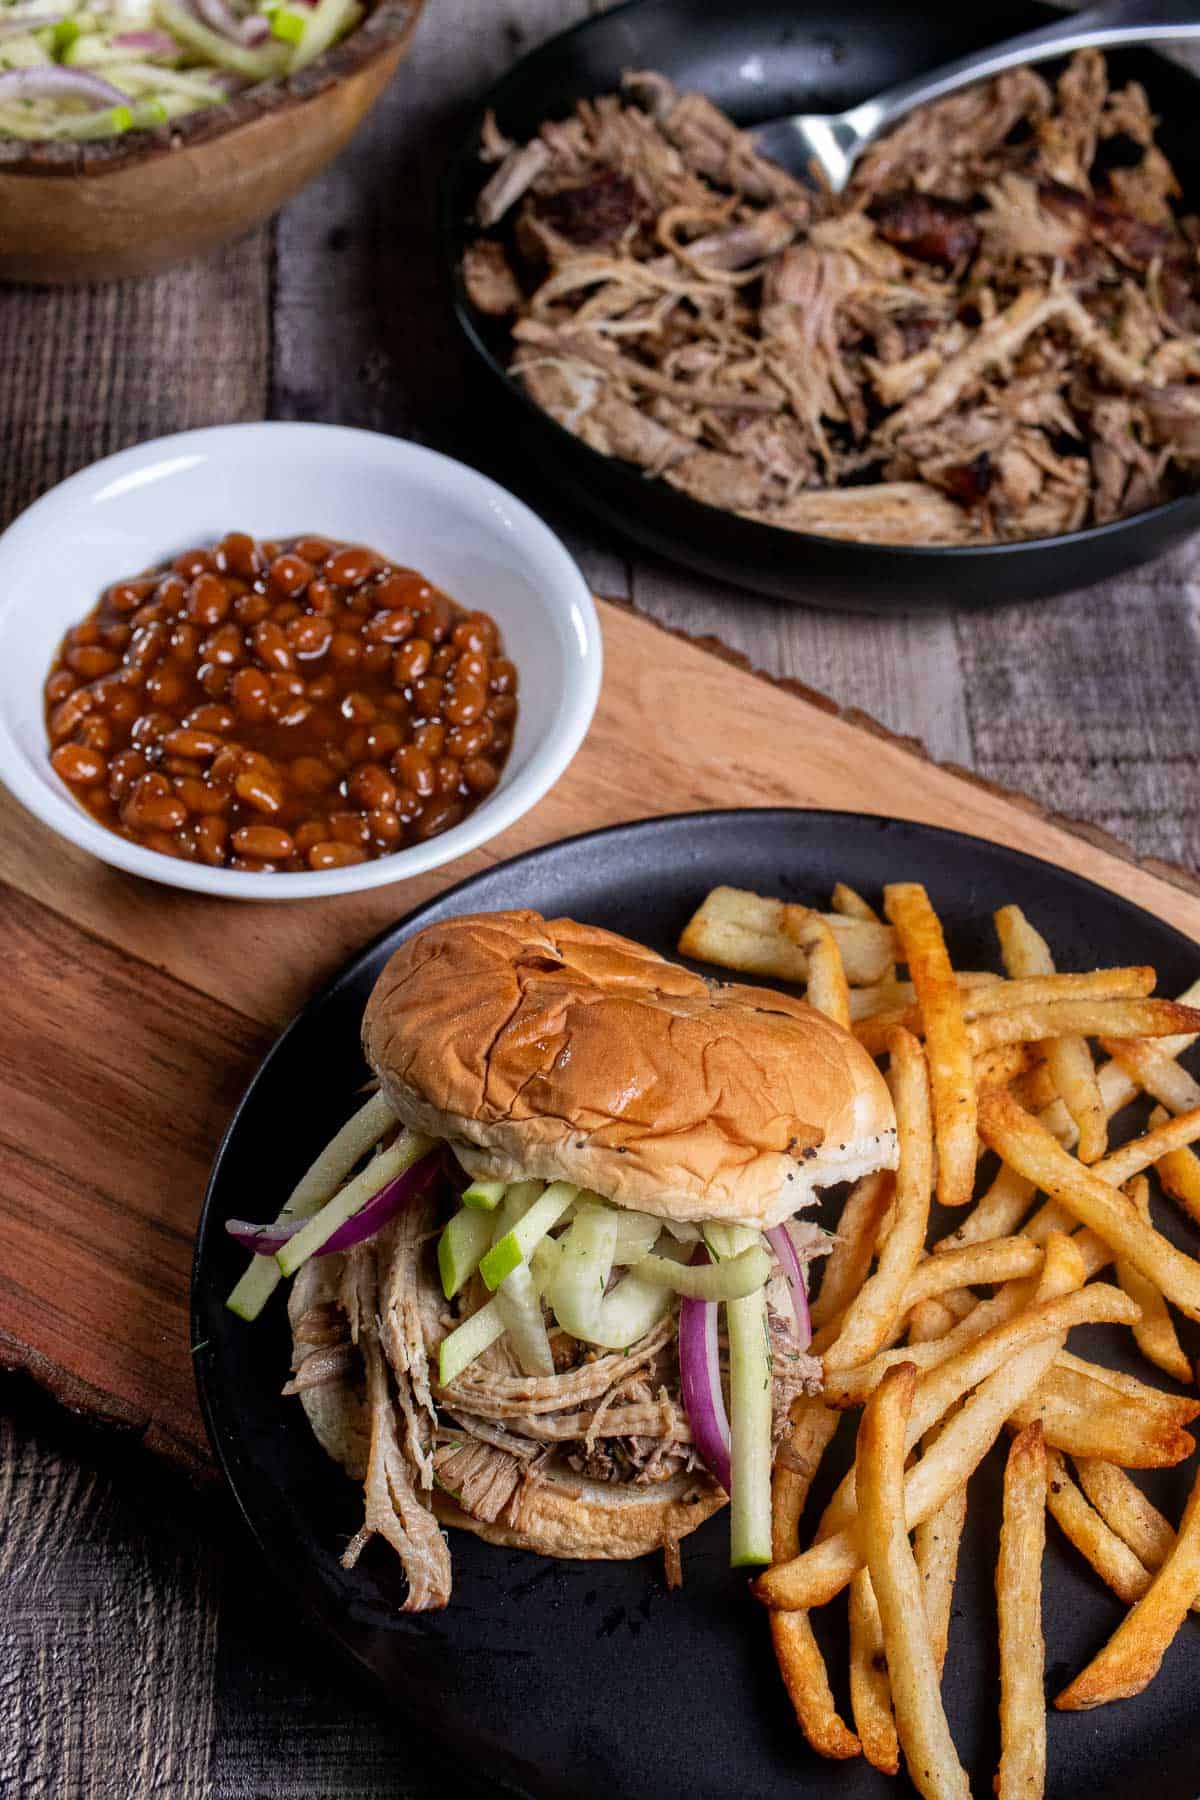 Cider braised pulled pork on an onion roll topped with fennel apple slaw and served with French fries on a black plate. 